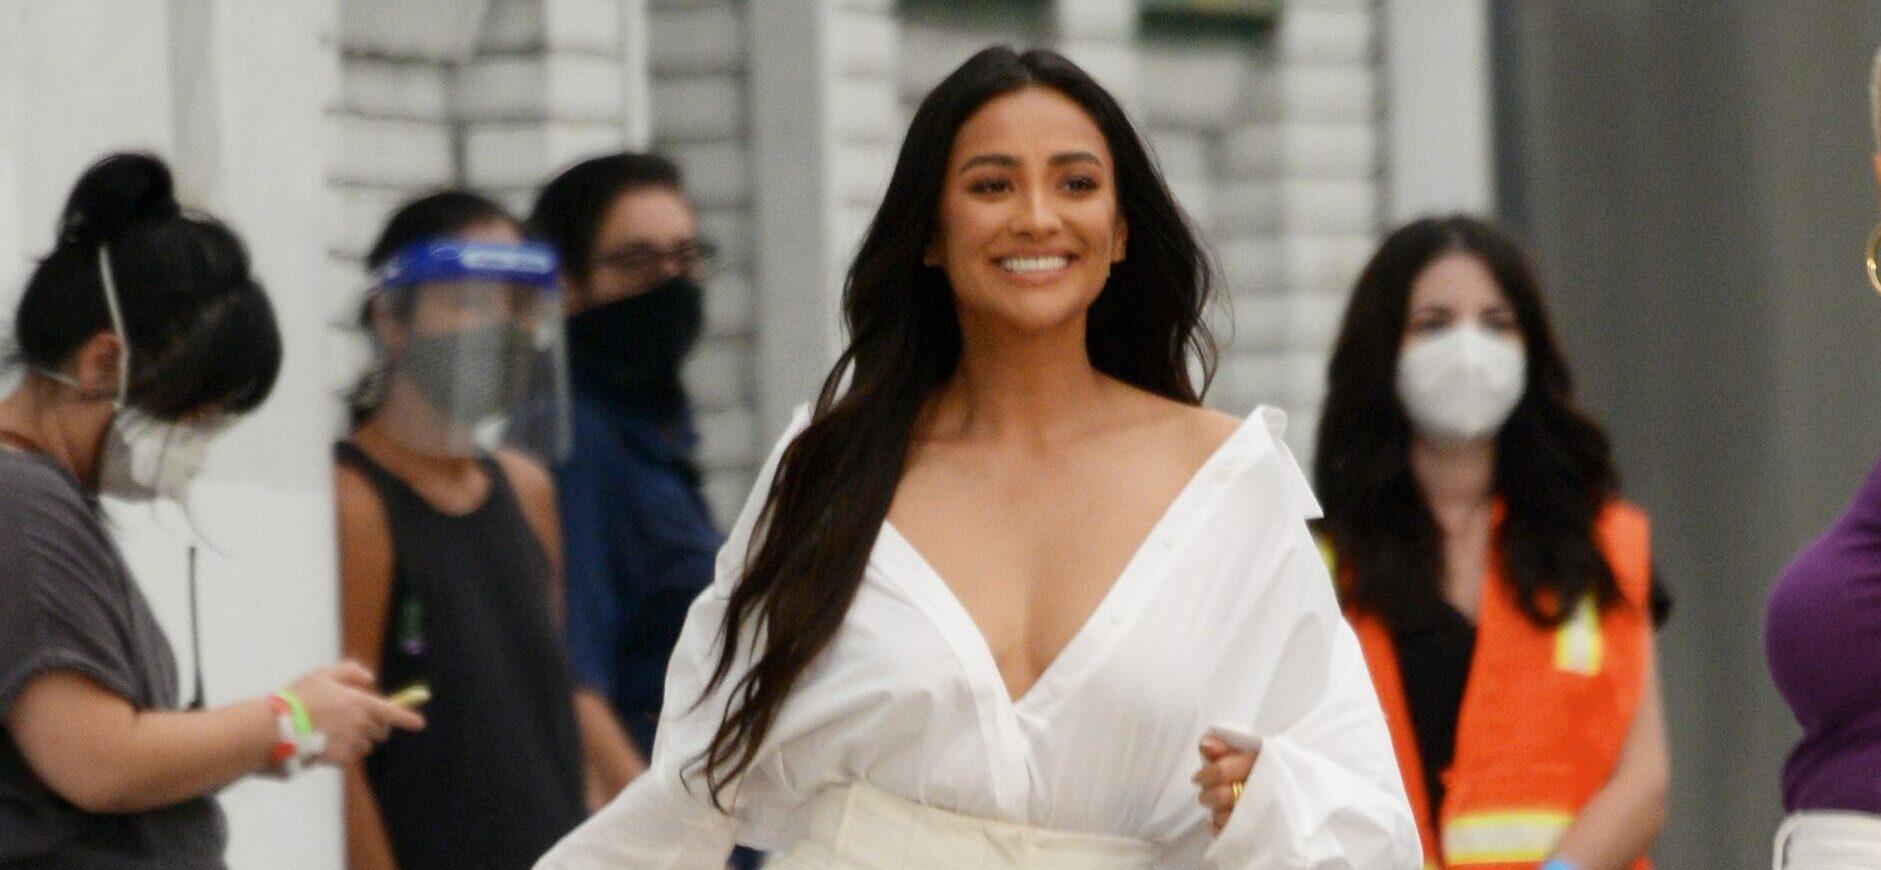 Shay Mitchell bust dance moves at Revlon commercial shoot